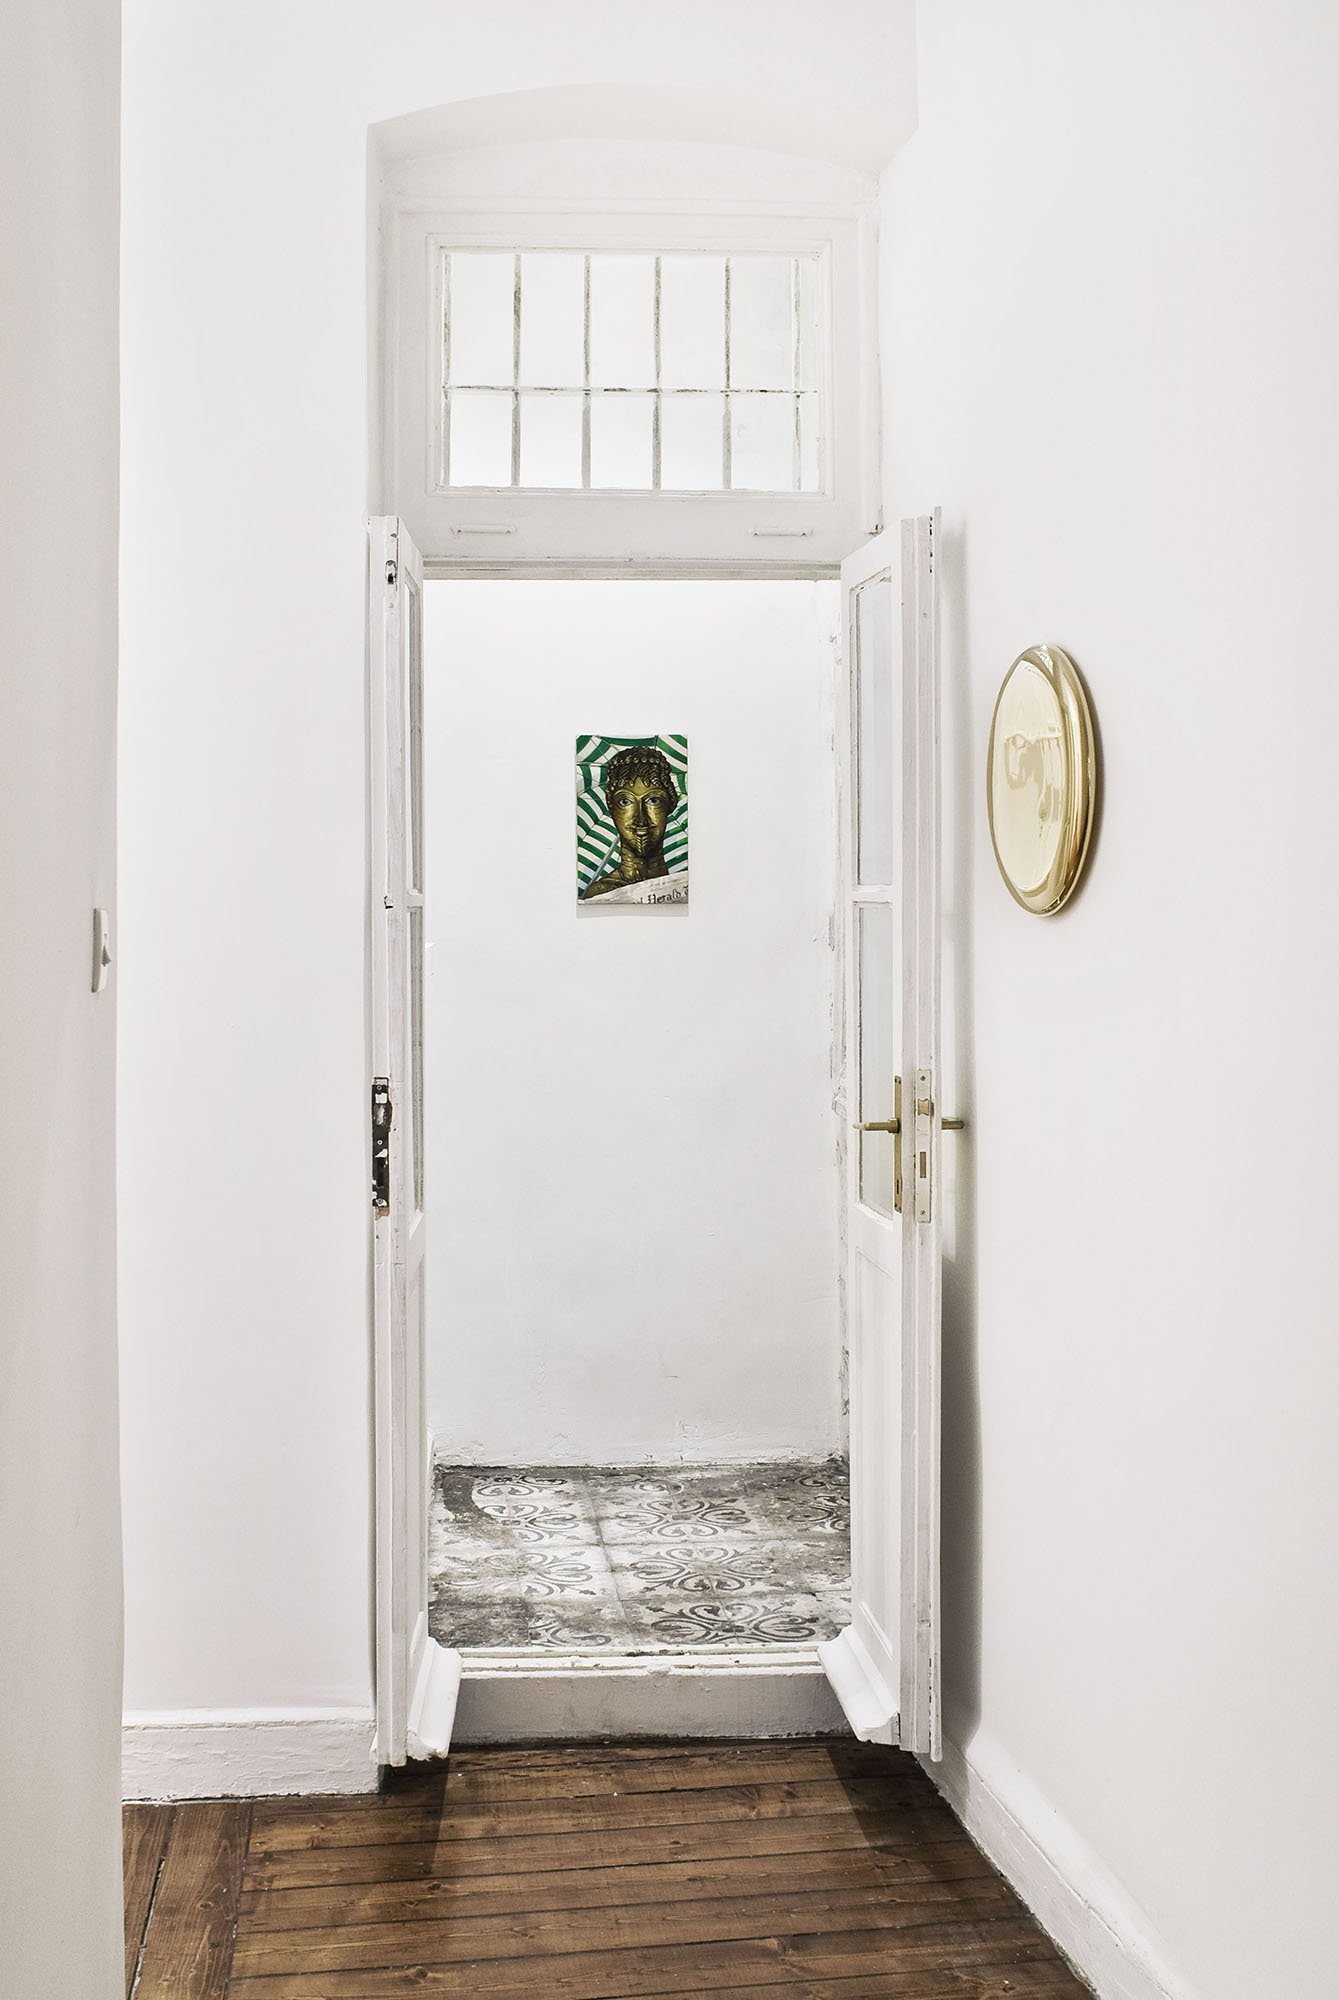 (Centre) Lukas Duwenhögger, Herald, oil on cotton drill, 45 x 29 cm (17 3/4 x 11 3/8 in), 1997, 2012(Right) Michael Anastassiades, Mirror, polished metal, 39 cm dia. (15 3/8 in. dia.)